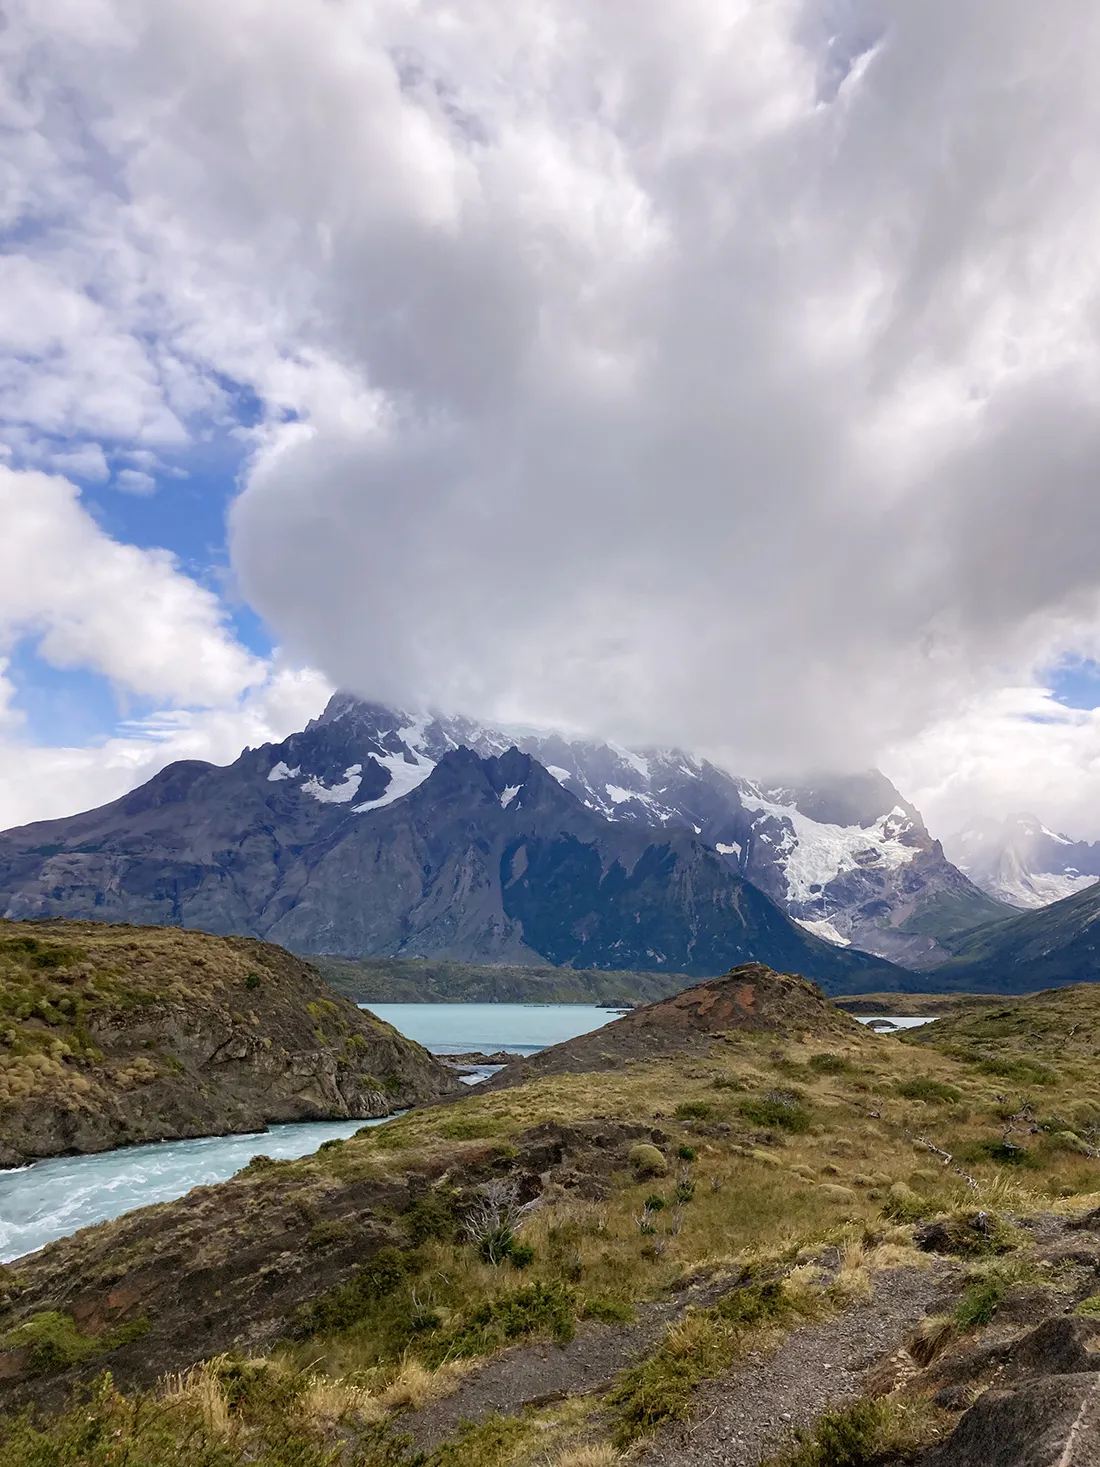 Scenic imagery of mountain and glacier in Chile.